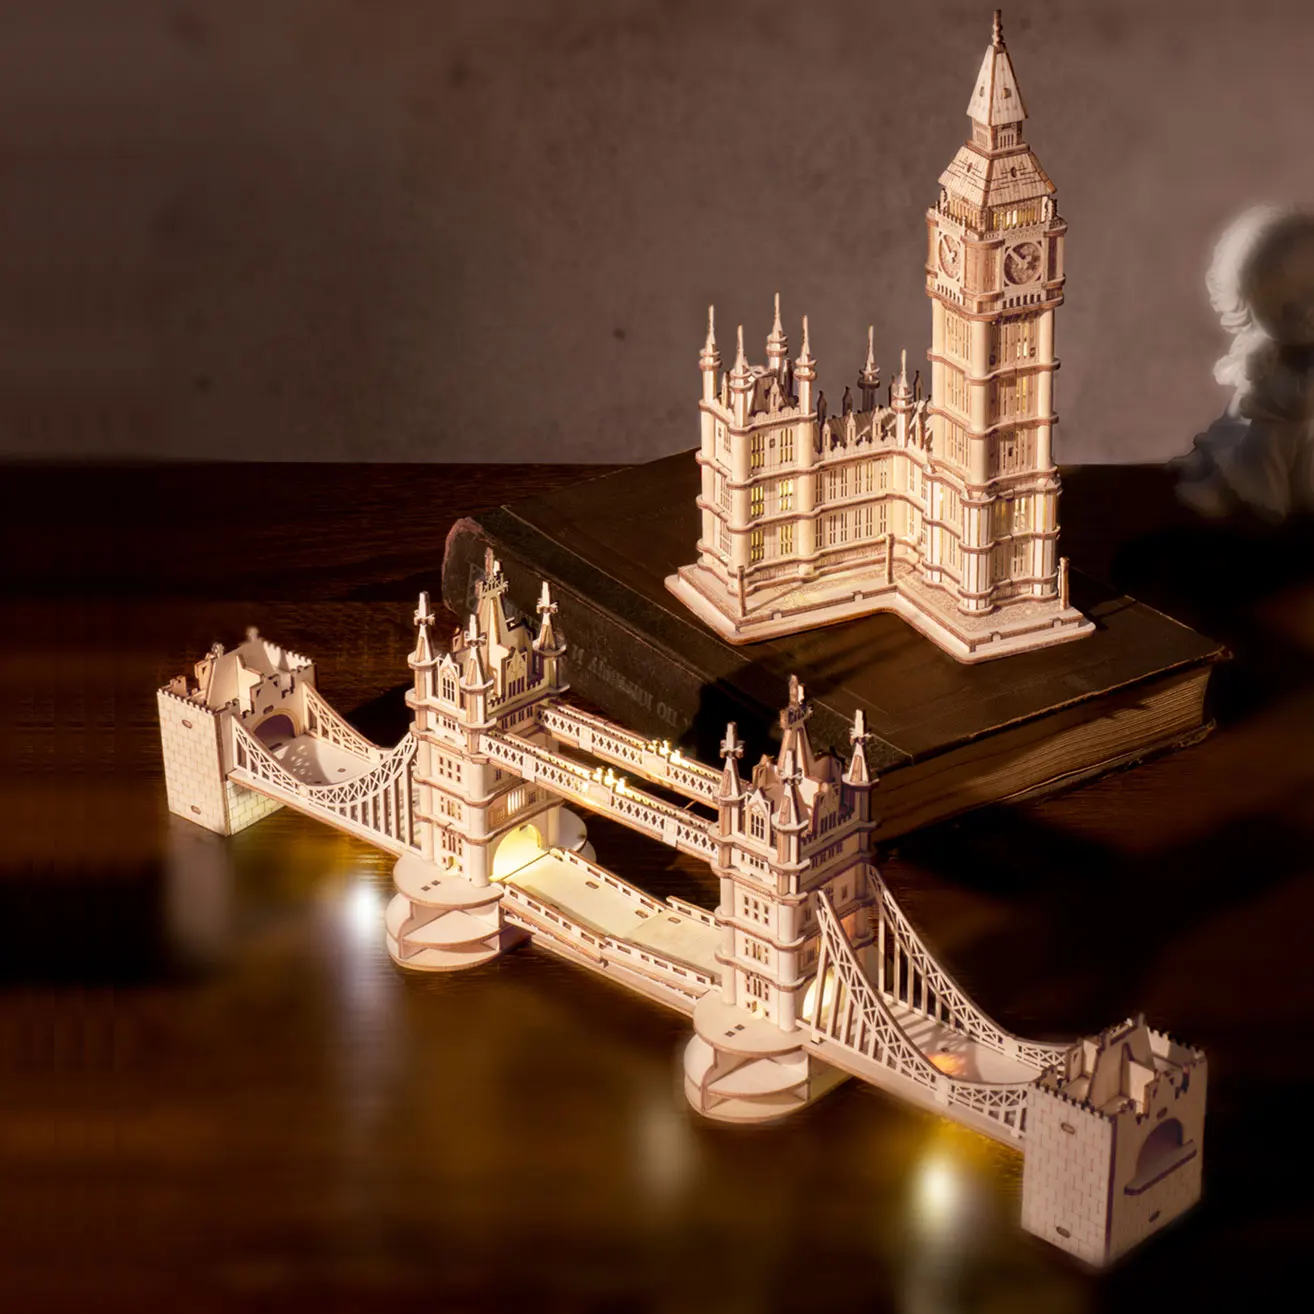 

3D Puzzle Wooden Craft Kits with LED Light DIY Tower Bridge Big Ben Construction Model Kit to Build for Adults Brain Teaser Puzz